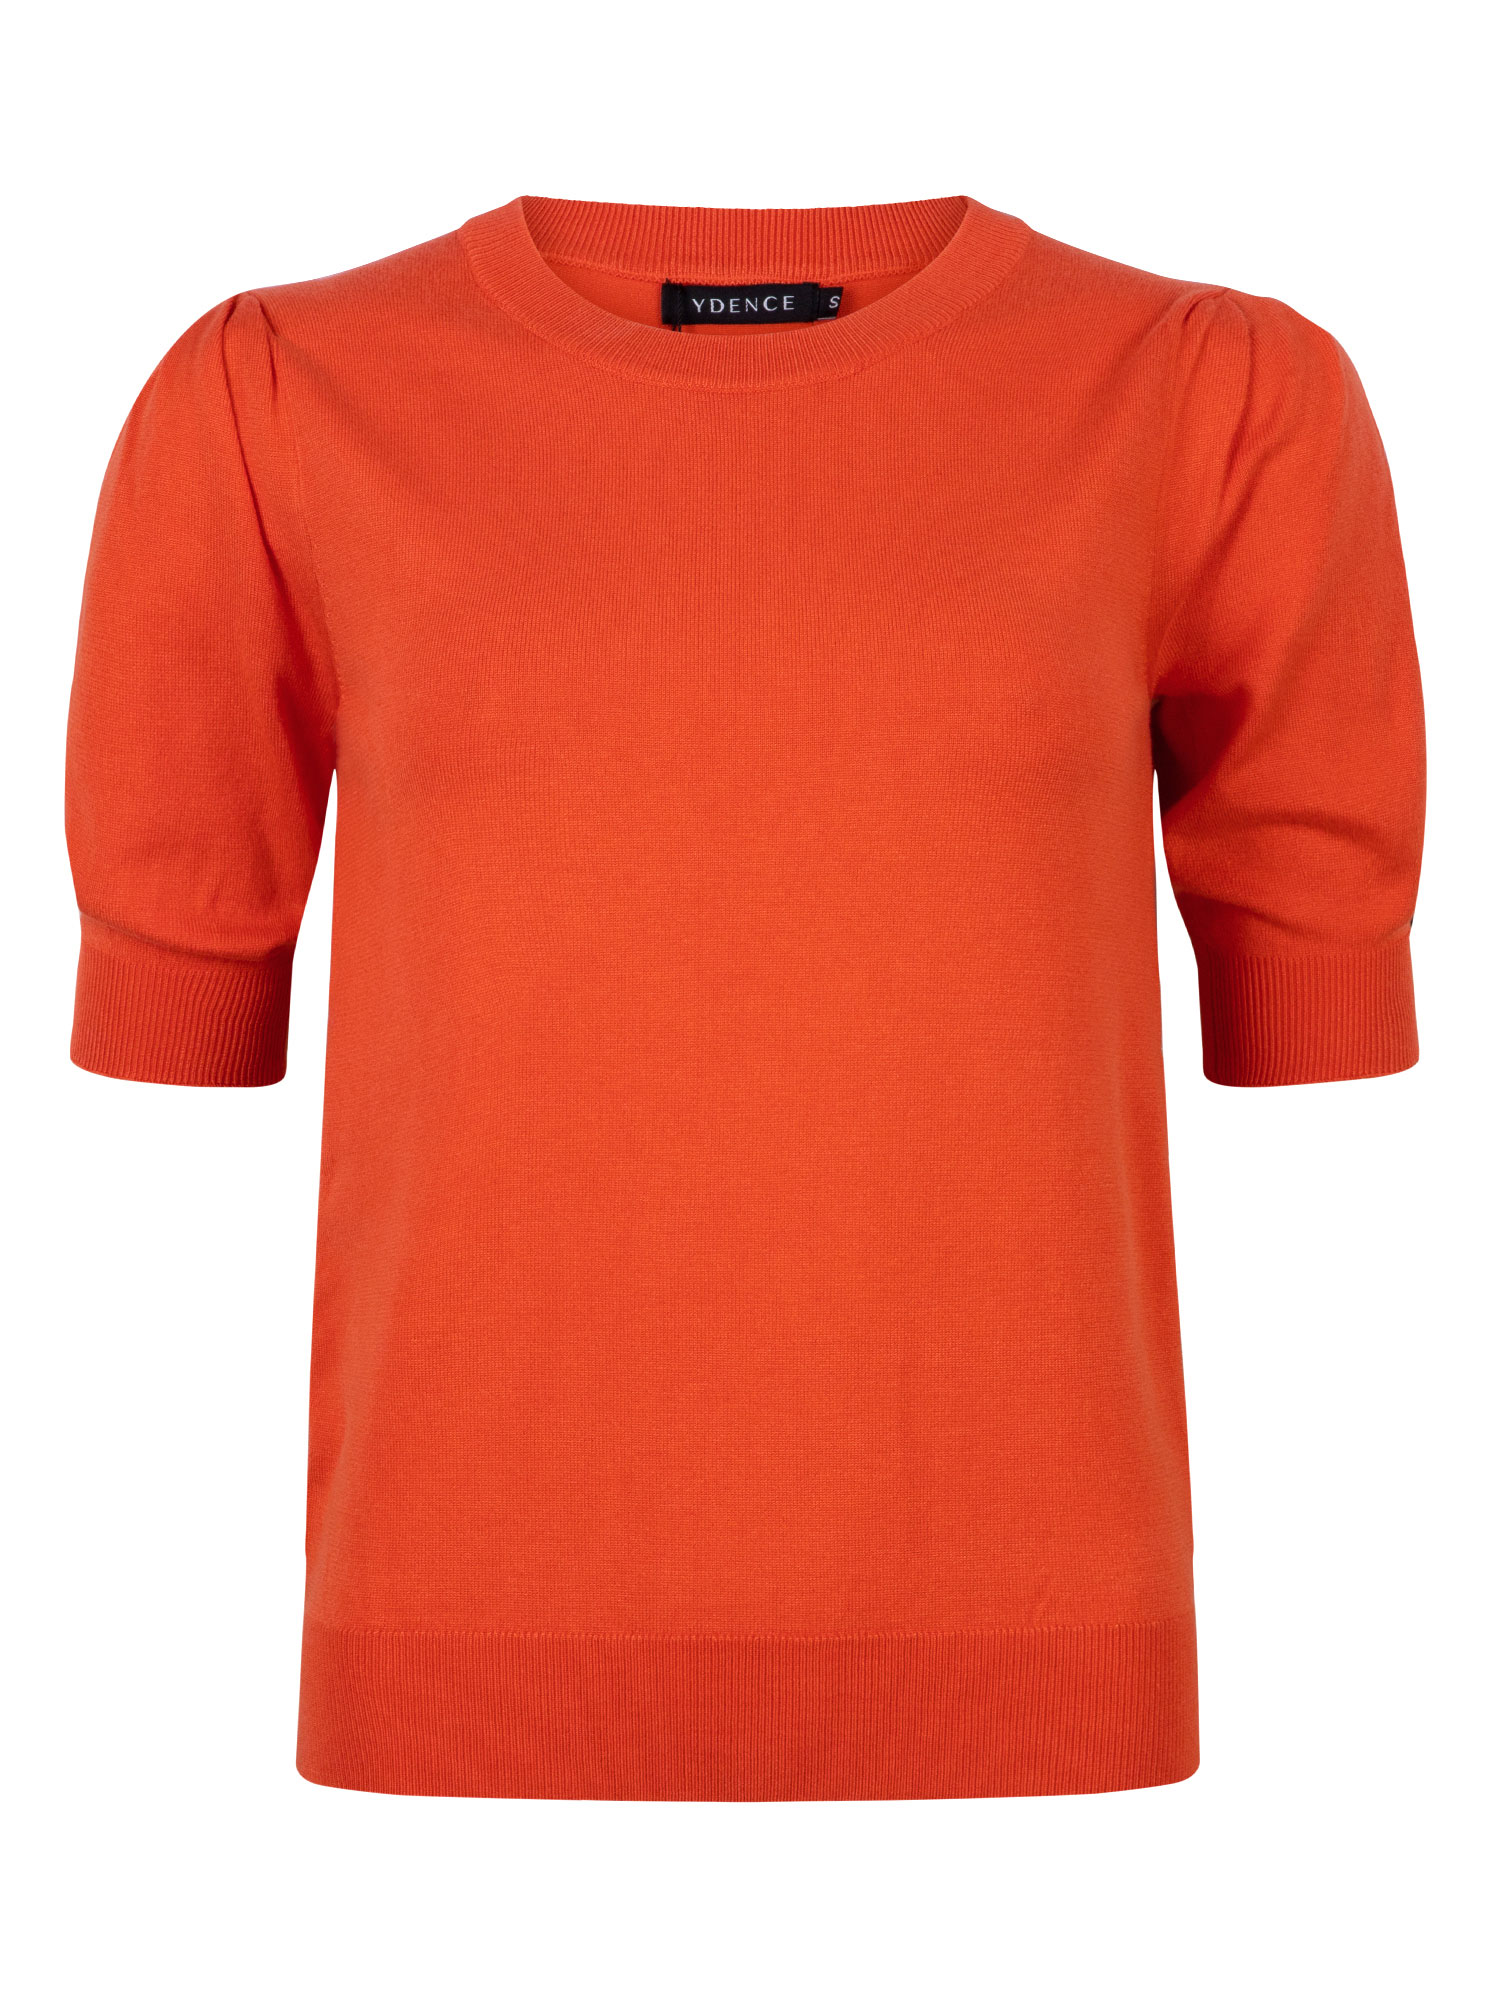 Ydence Knitted top Dyonne Orange/red